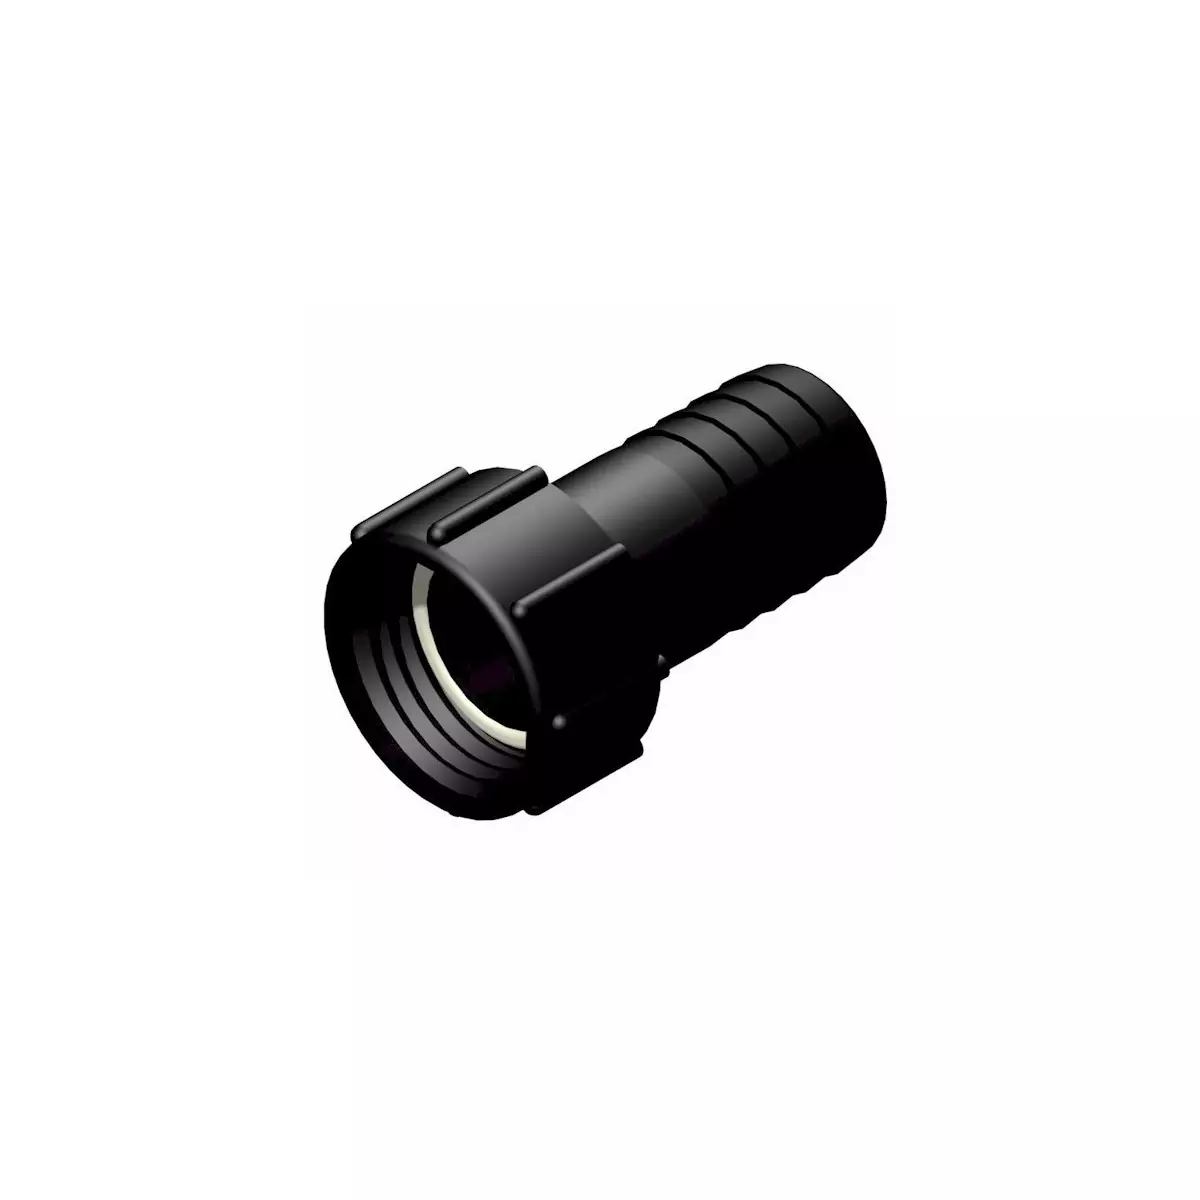 Product sheet 2 "female connector S60x6 - straight fluted male Ø 50mm